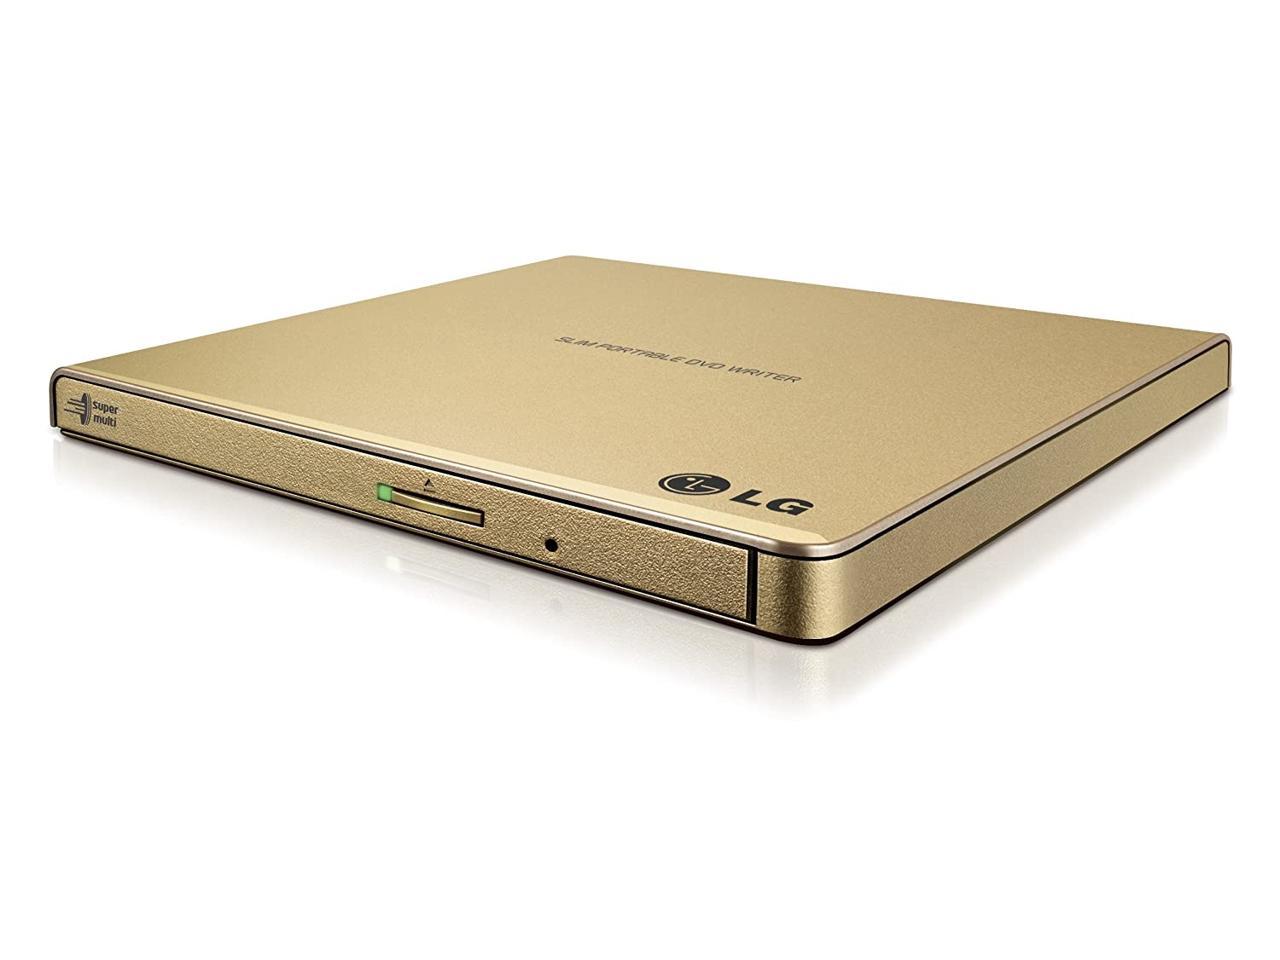 LG External CD / DVD Rewriter With M-Disc Mac & Surface Support (Gold) - Model GP65NG60